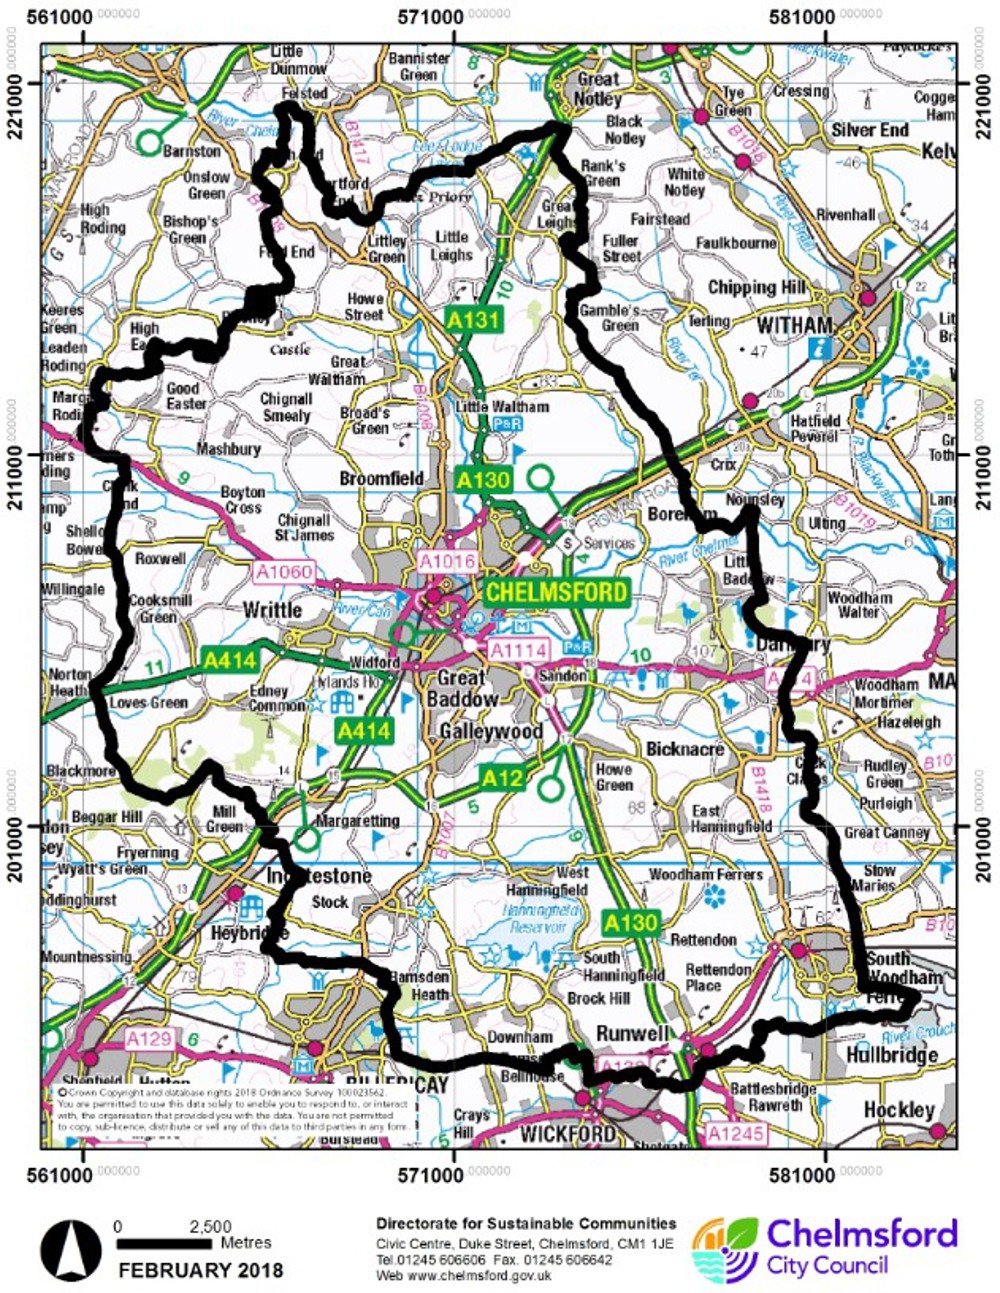 Map showing boundaries of Chelmsford City Council's administrative area